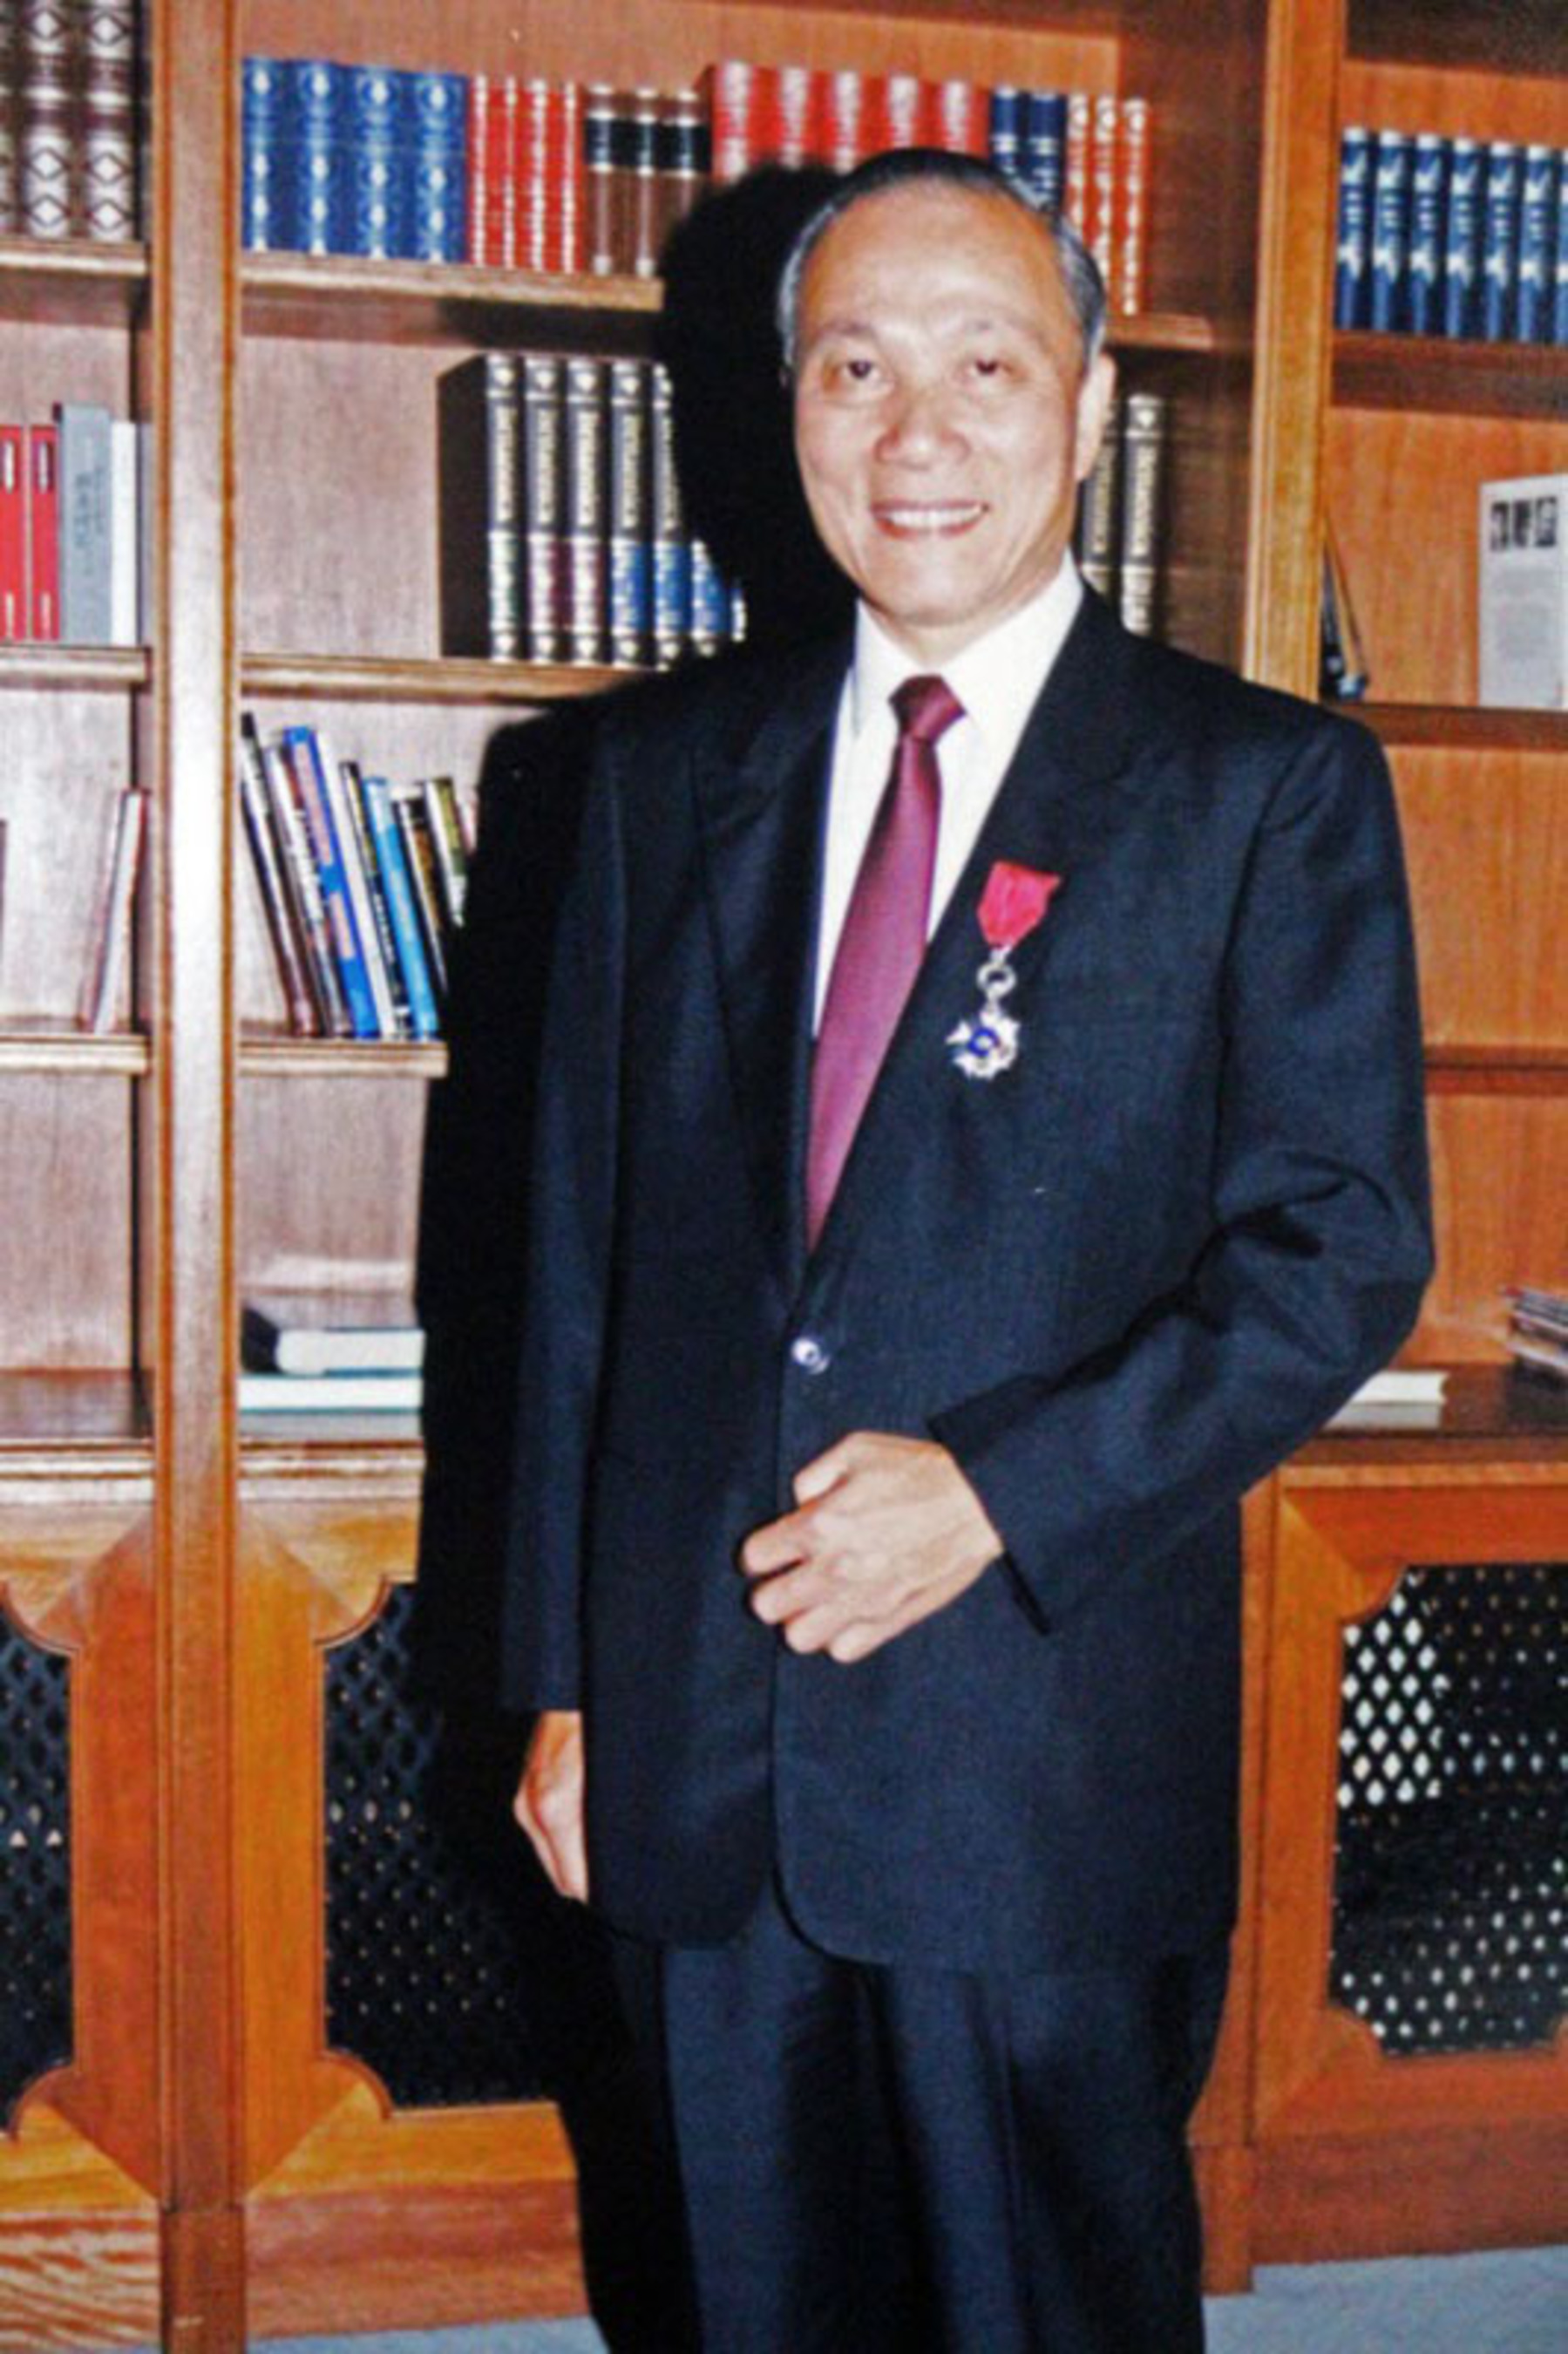 Leung Sik Wah with his Silver Bauhinia Star (2009). (PRNewsFoto/UBM Asia Ltd) (PRNewsFoto/UBM ASIA LTD)